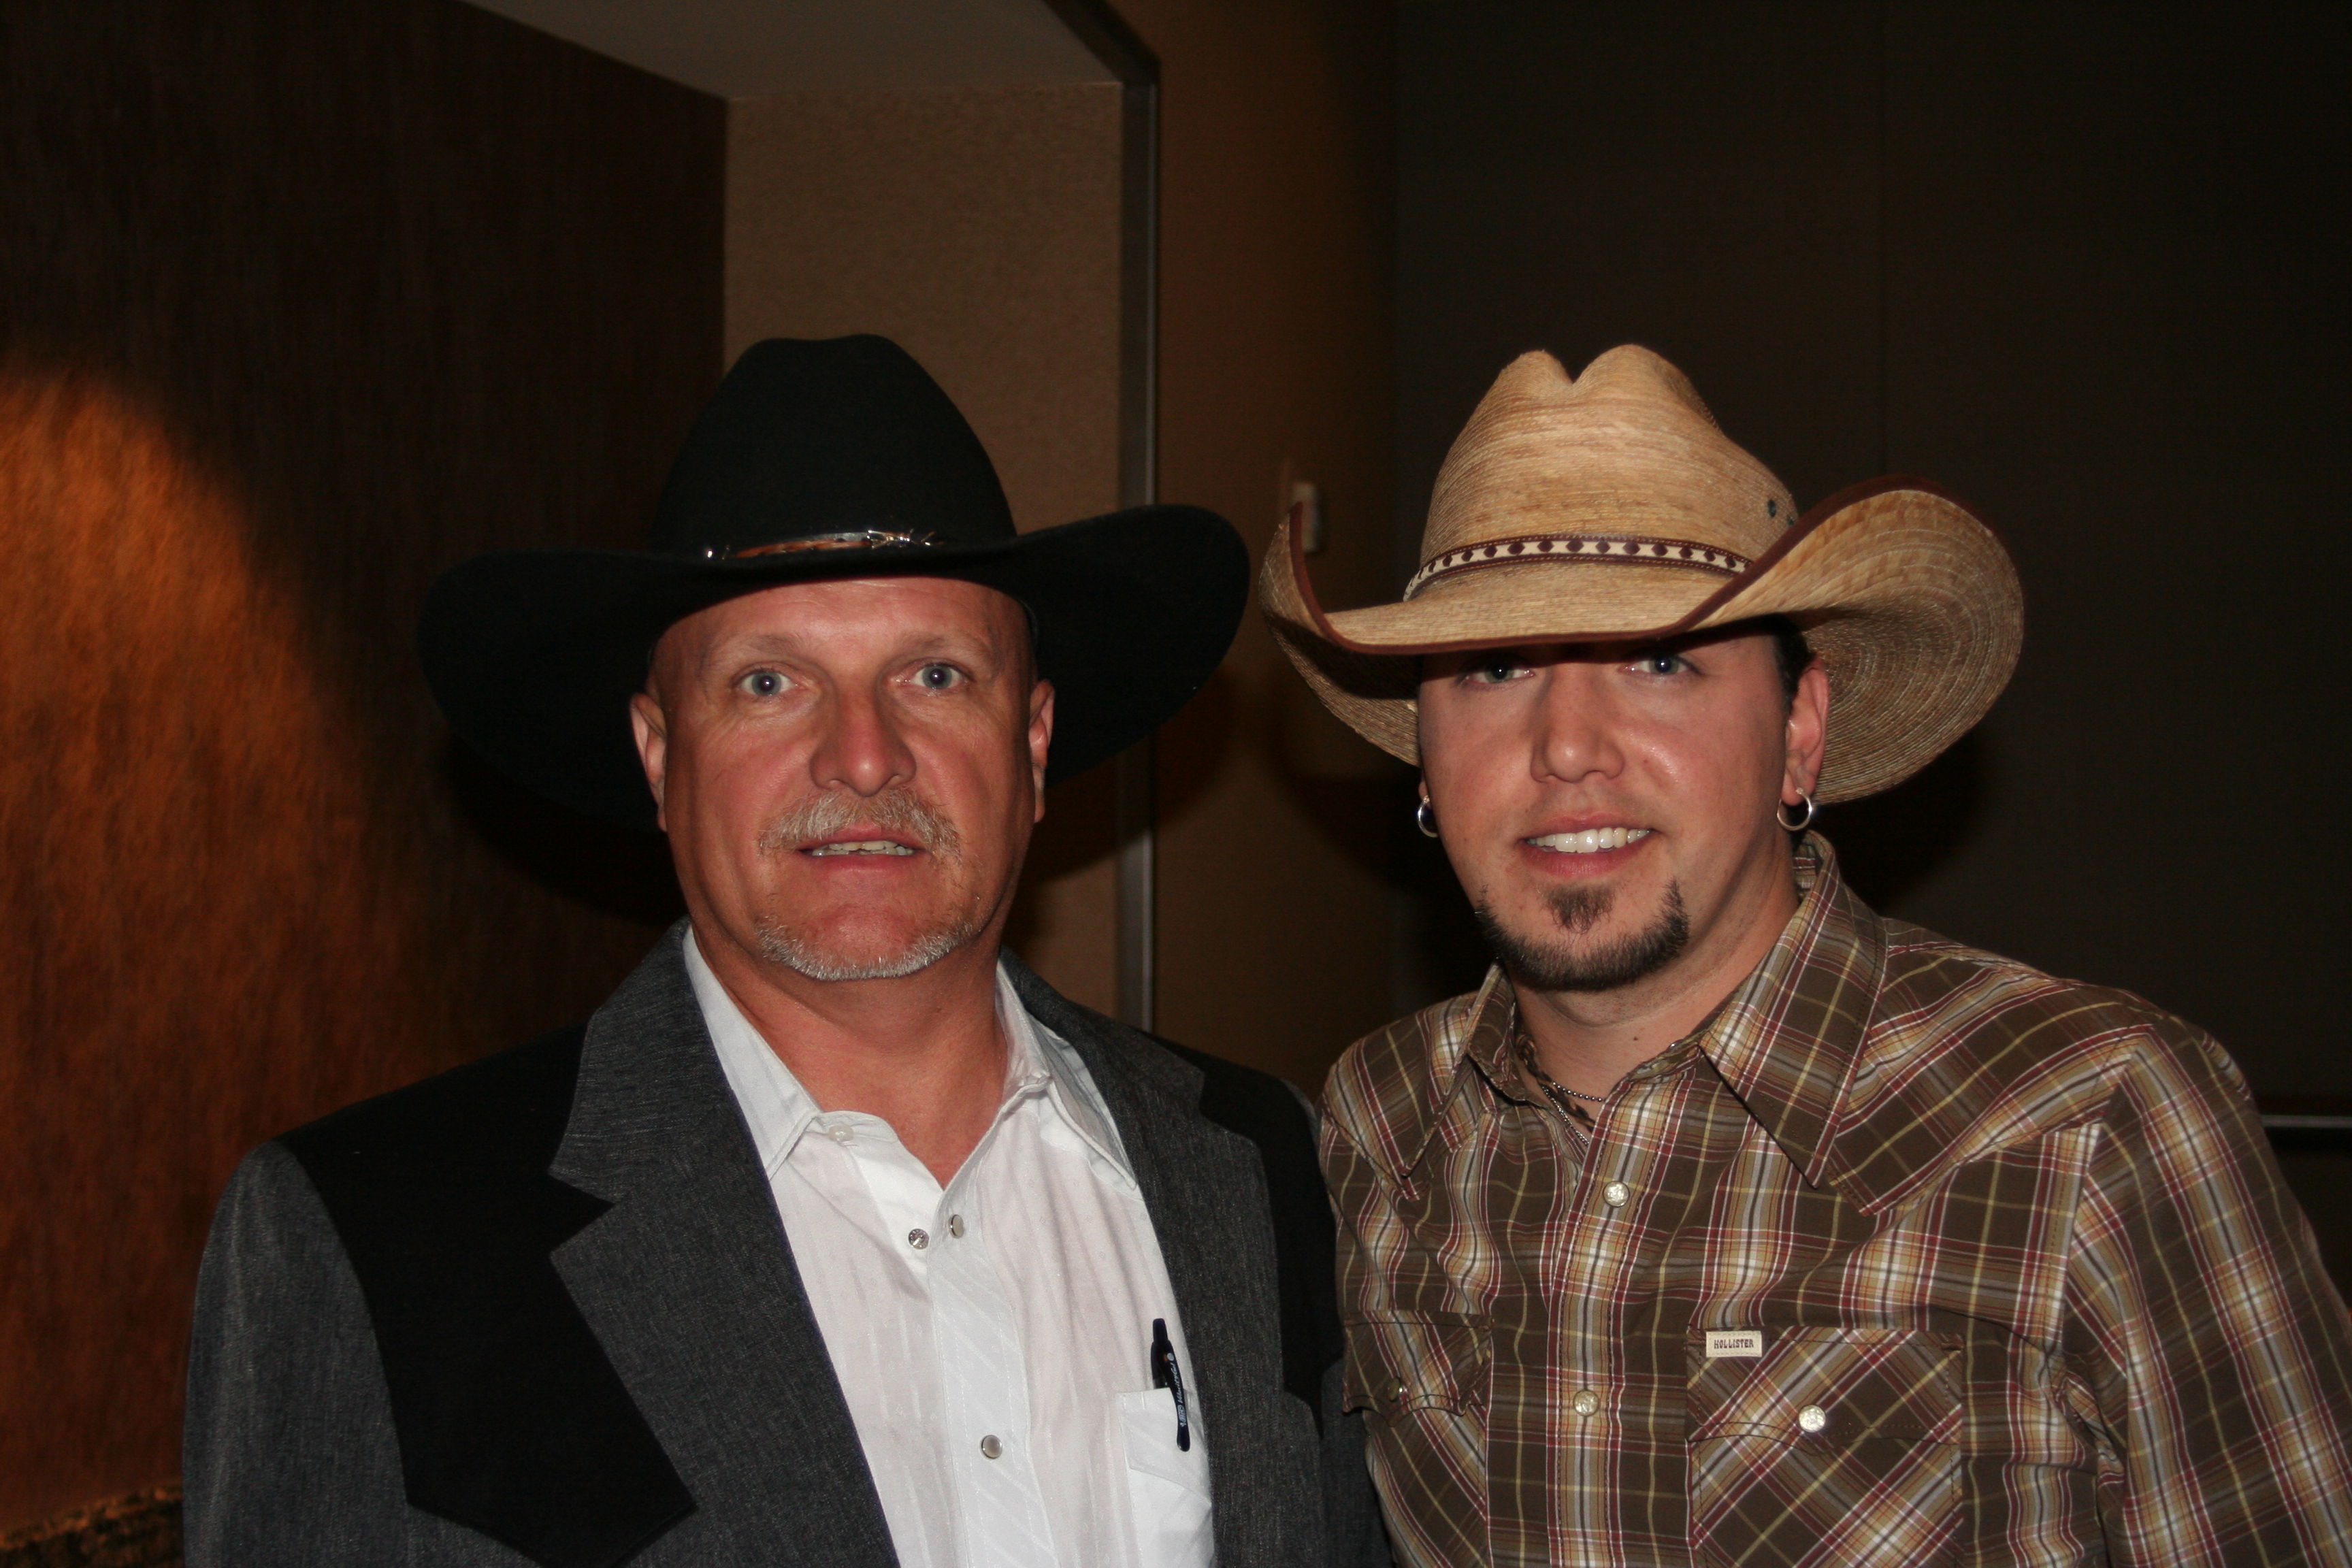 Jayson Aldean and me at the Academy of Country Music Awards Show.